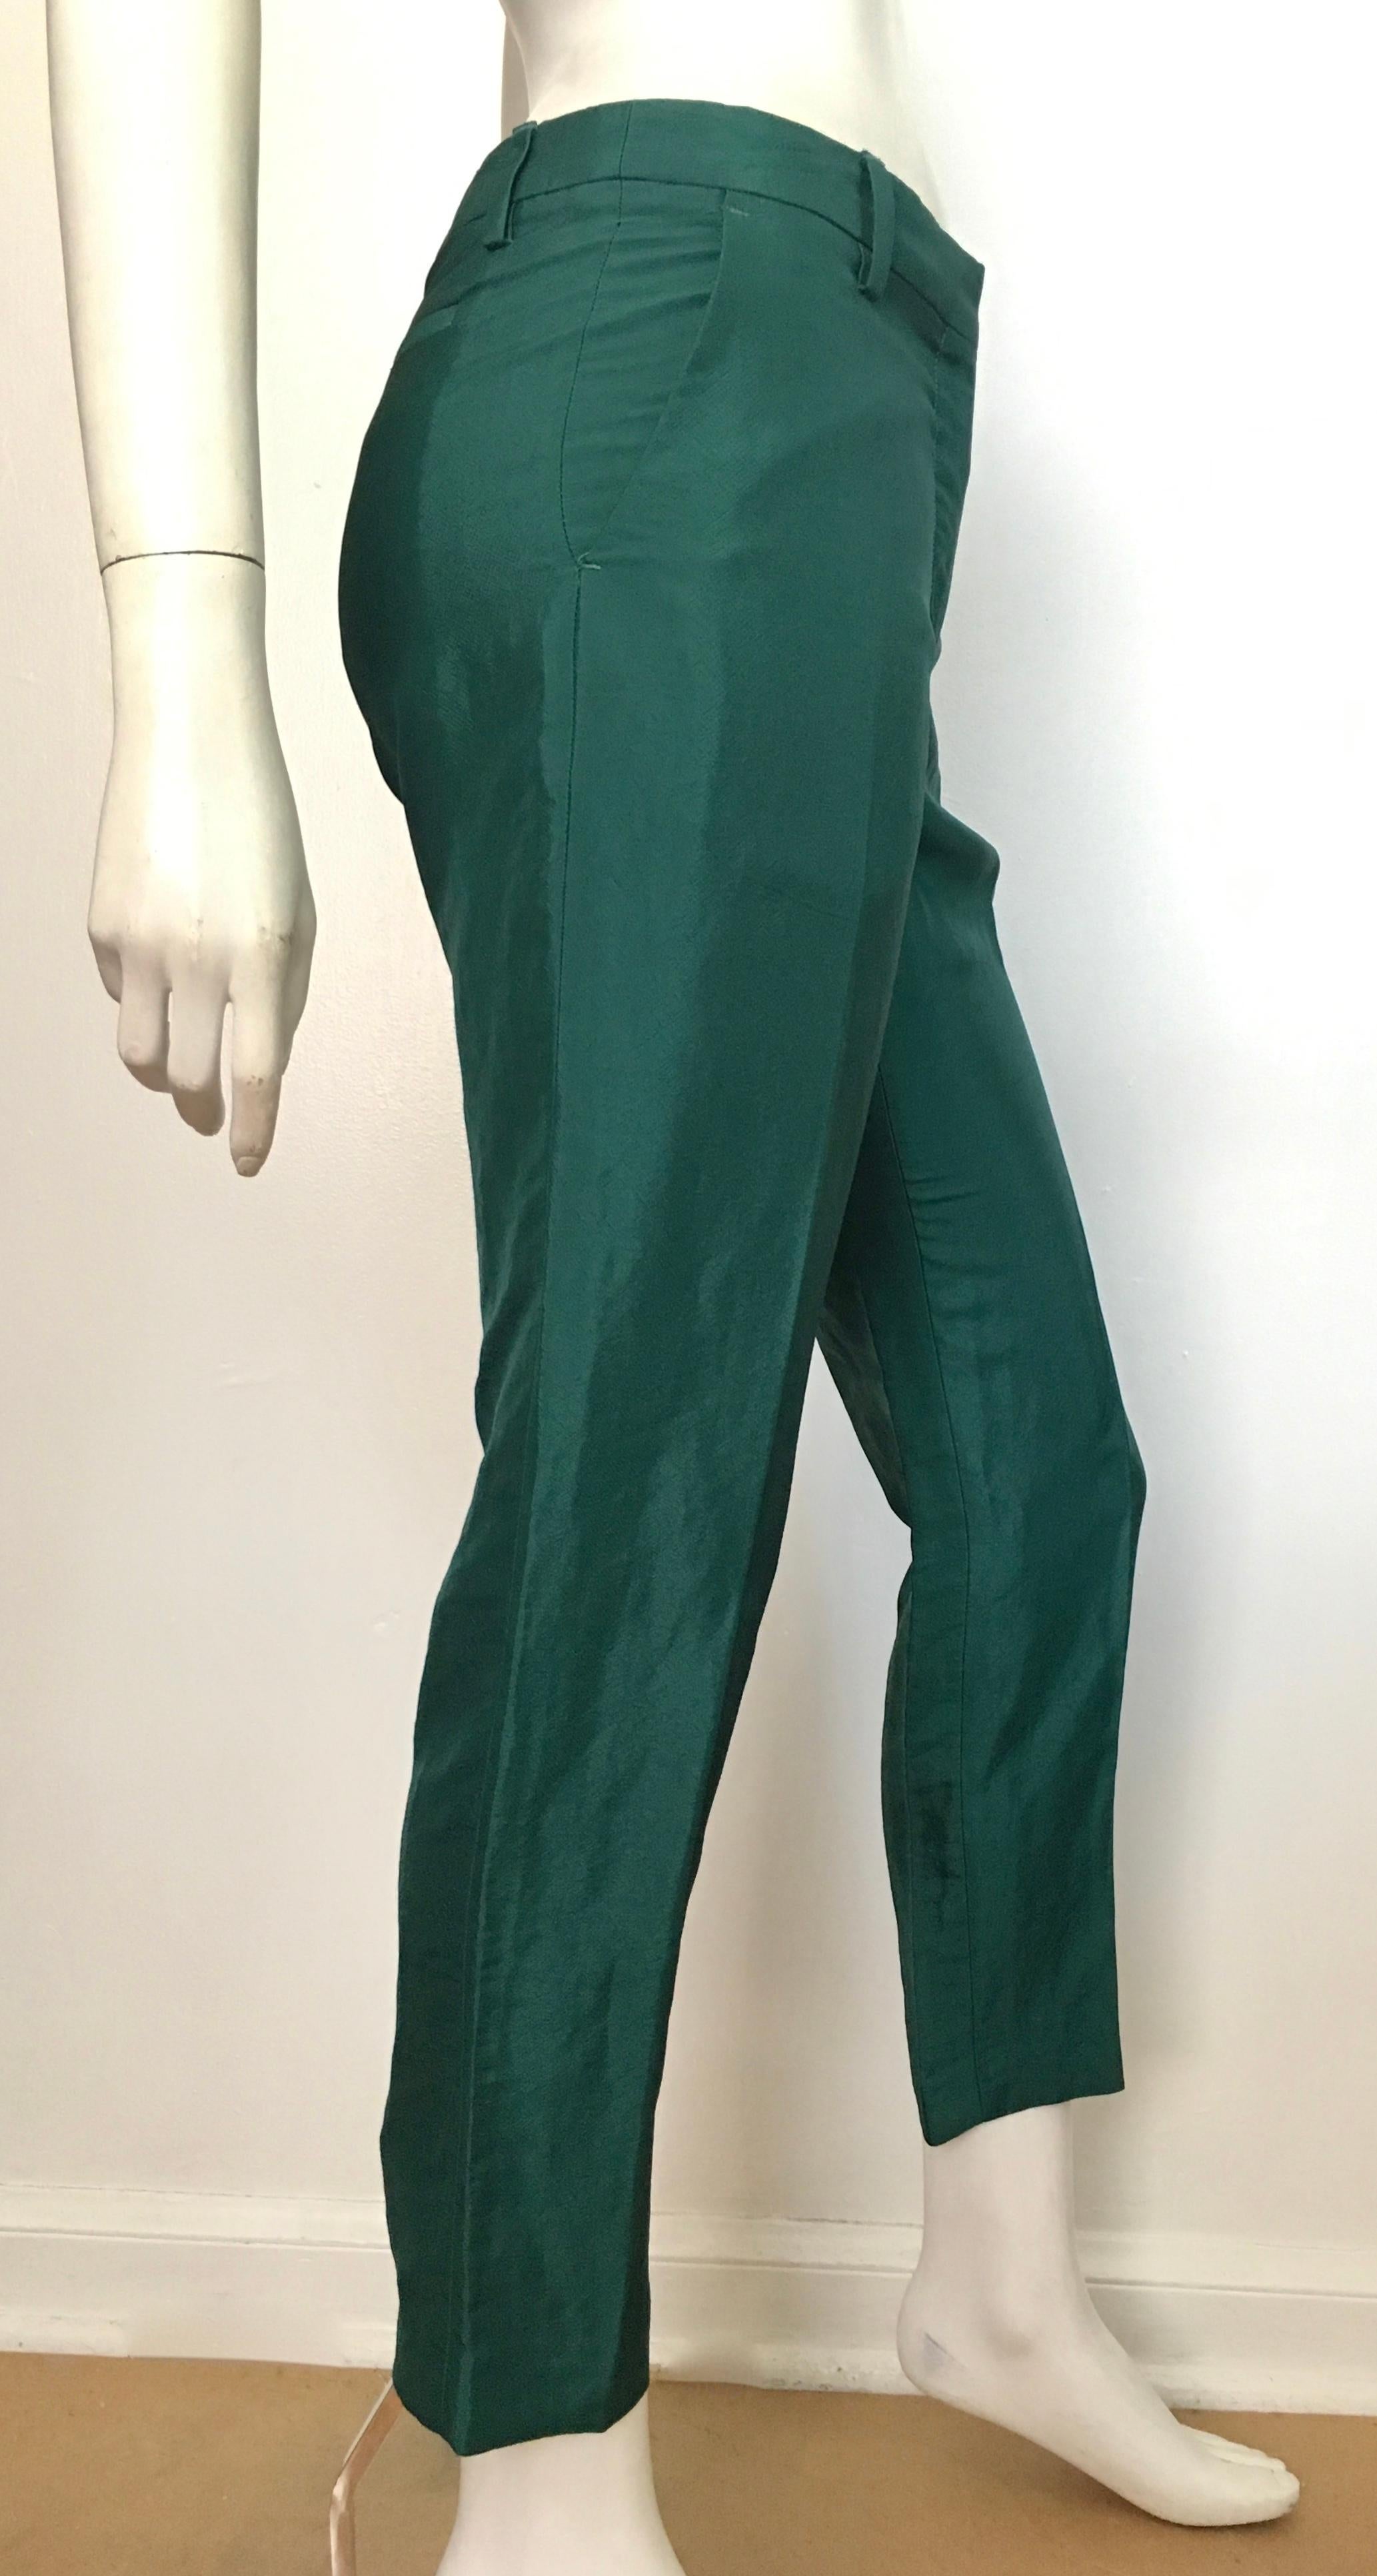 Black Dries Van Noten Green Dress Pants with Pockets Size 4 / 34. For Sale